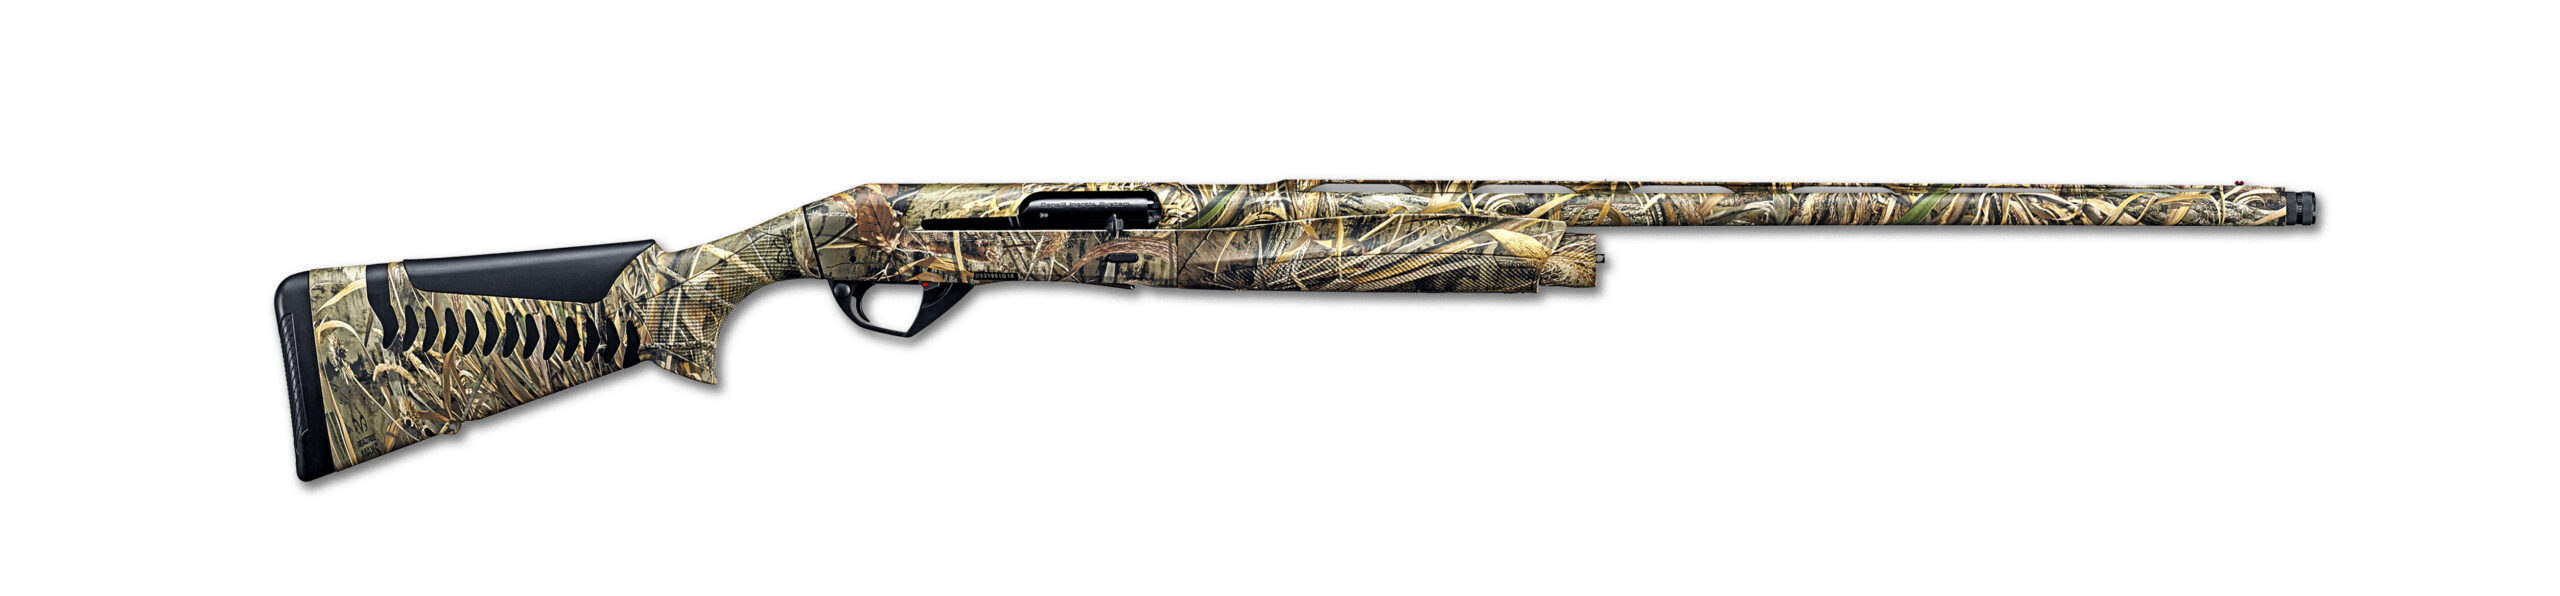 Benelli launched the 20-gauge version of its iconic Super Black Eagle. It will also be available in a 3-inch 12-gauge model for the first time ever.